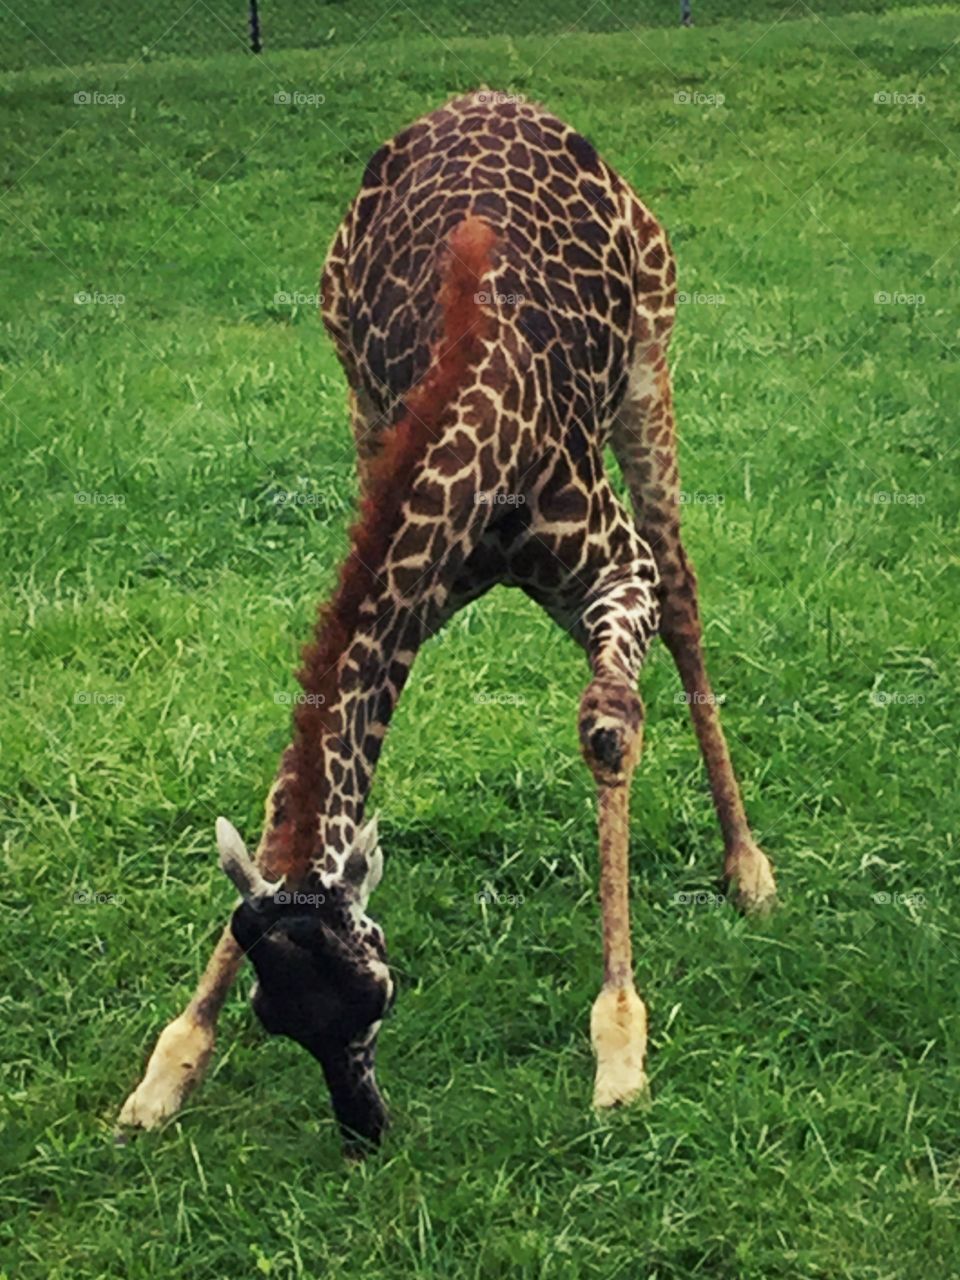 This is a baby giraffe at the Cleveland metro parks zoo 